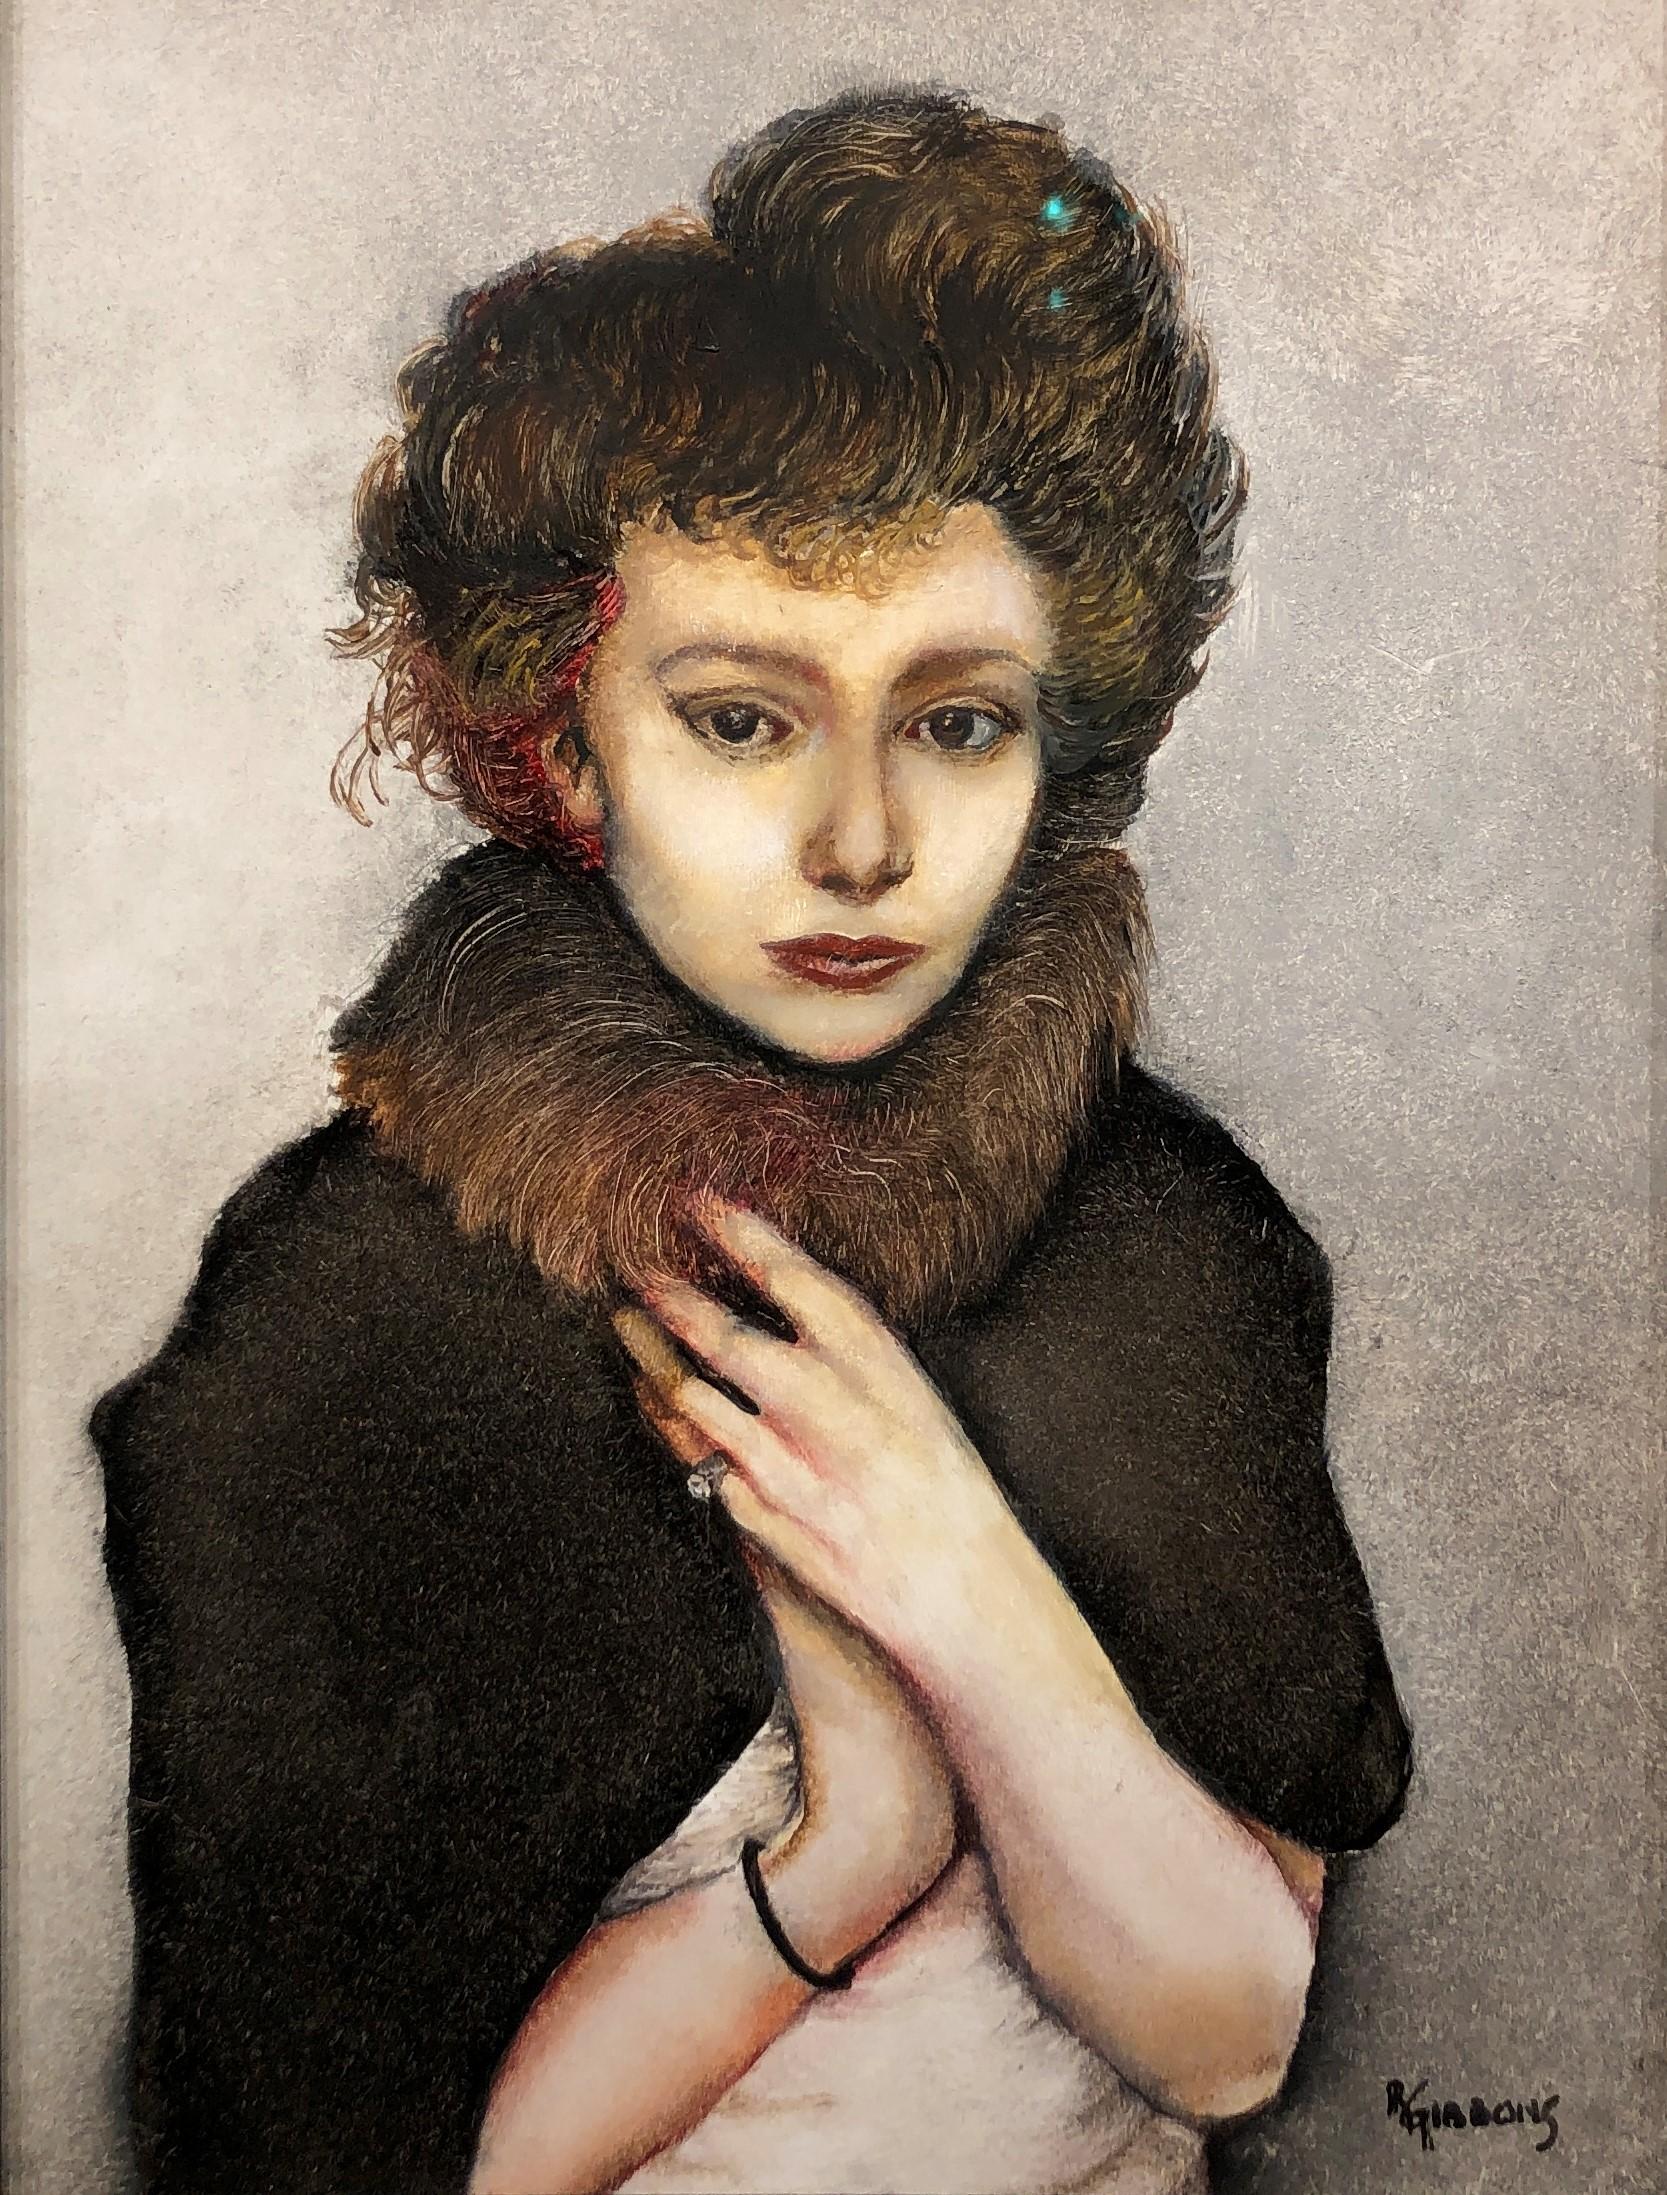 Remembering That Winter in Vienna, Portrait of a Women in Fur, Original Oil - Contemporary Painting by Richard Gibbons